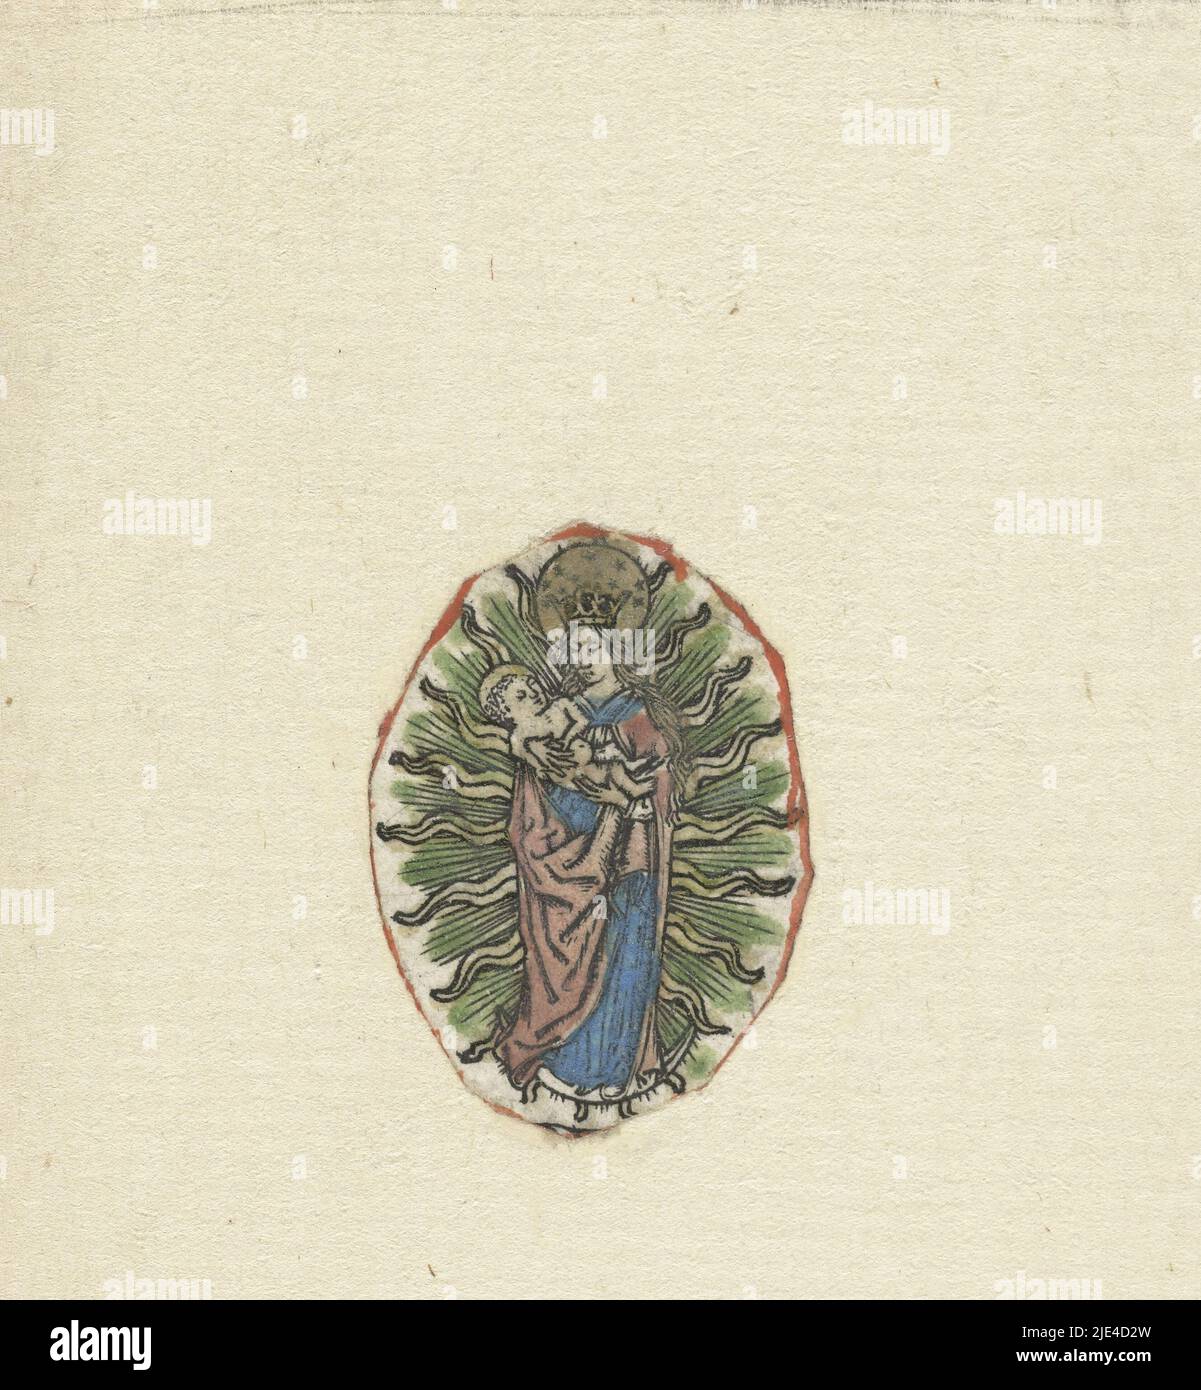 Madonna on Crescent Moon, anonymous, 1400 - 1500, Mary with the Christ Child in her arms, standing on a crescent moon, surrounded by a halo of rays., print maker: anonymous, Germany, 1400 - 1500, paper, engraving, h 30 mm × w 22 mm Stock Photo